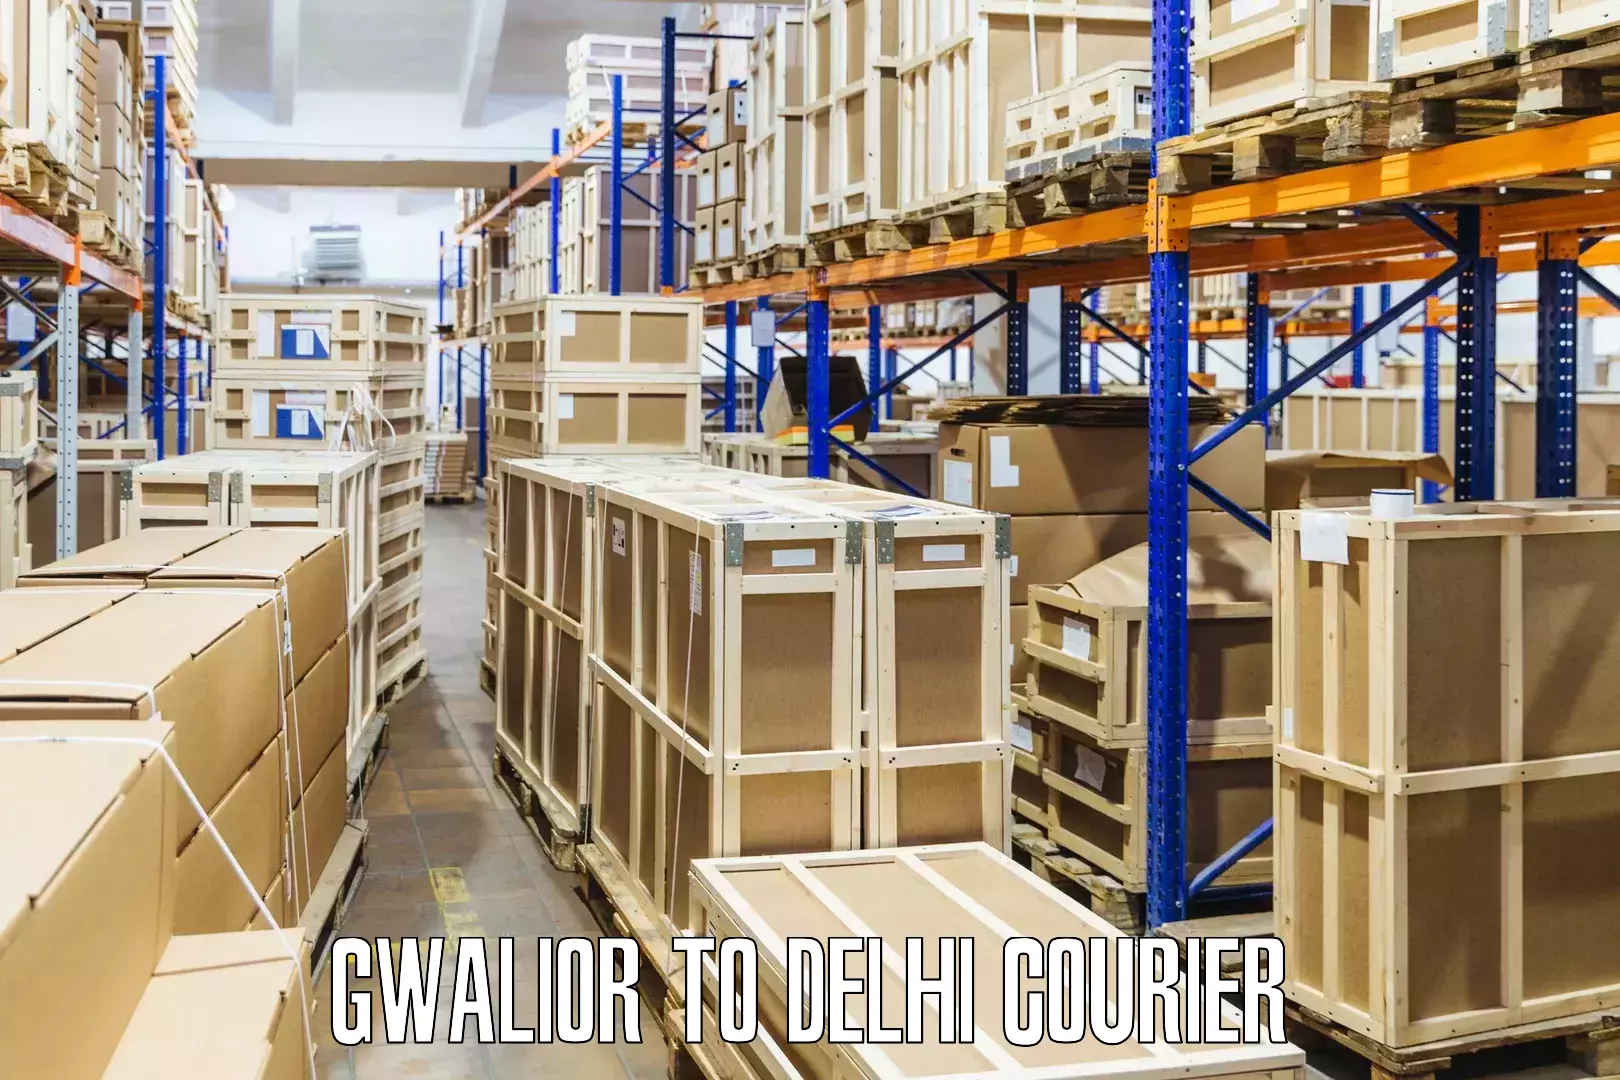 High-capacity parcel service Gwalior to Indraprastha